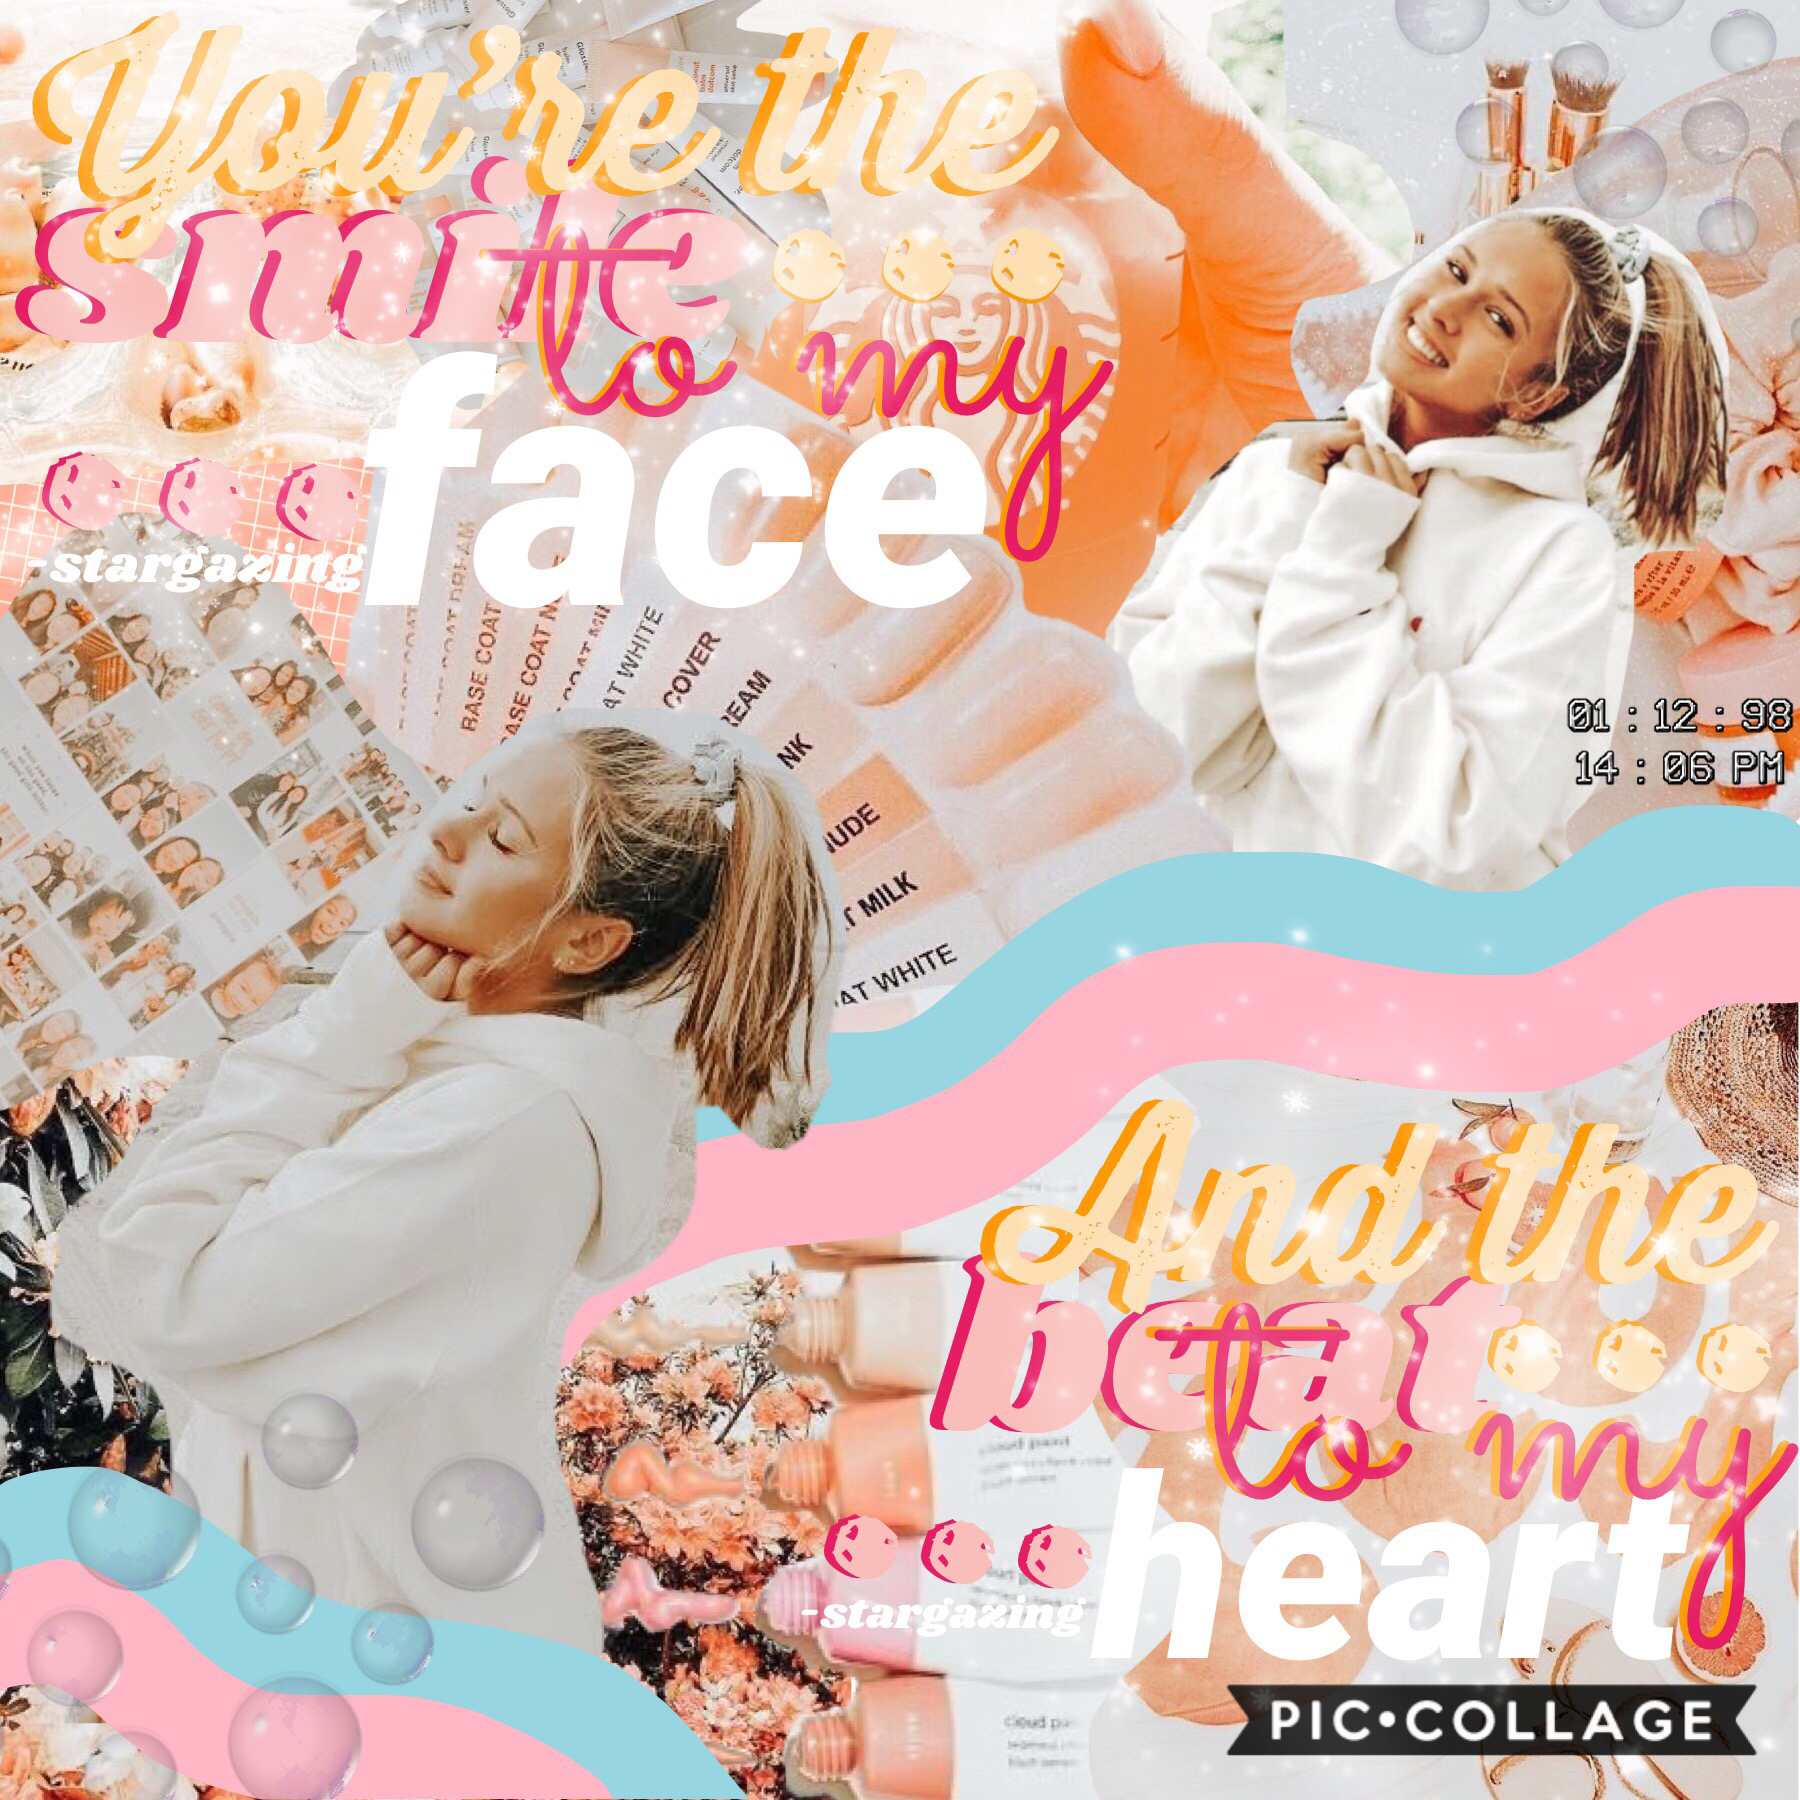 🌸IMPORTANT TAP🌸
@shiningstars_ did something
very similar to this so I tried to
recreate it. I think a lot of my 
collages in the future will be 
inspired by her. So credit goes 
to the amazing shiningstars_